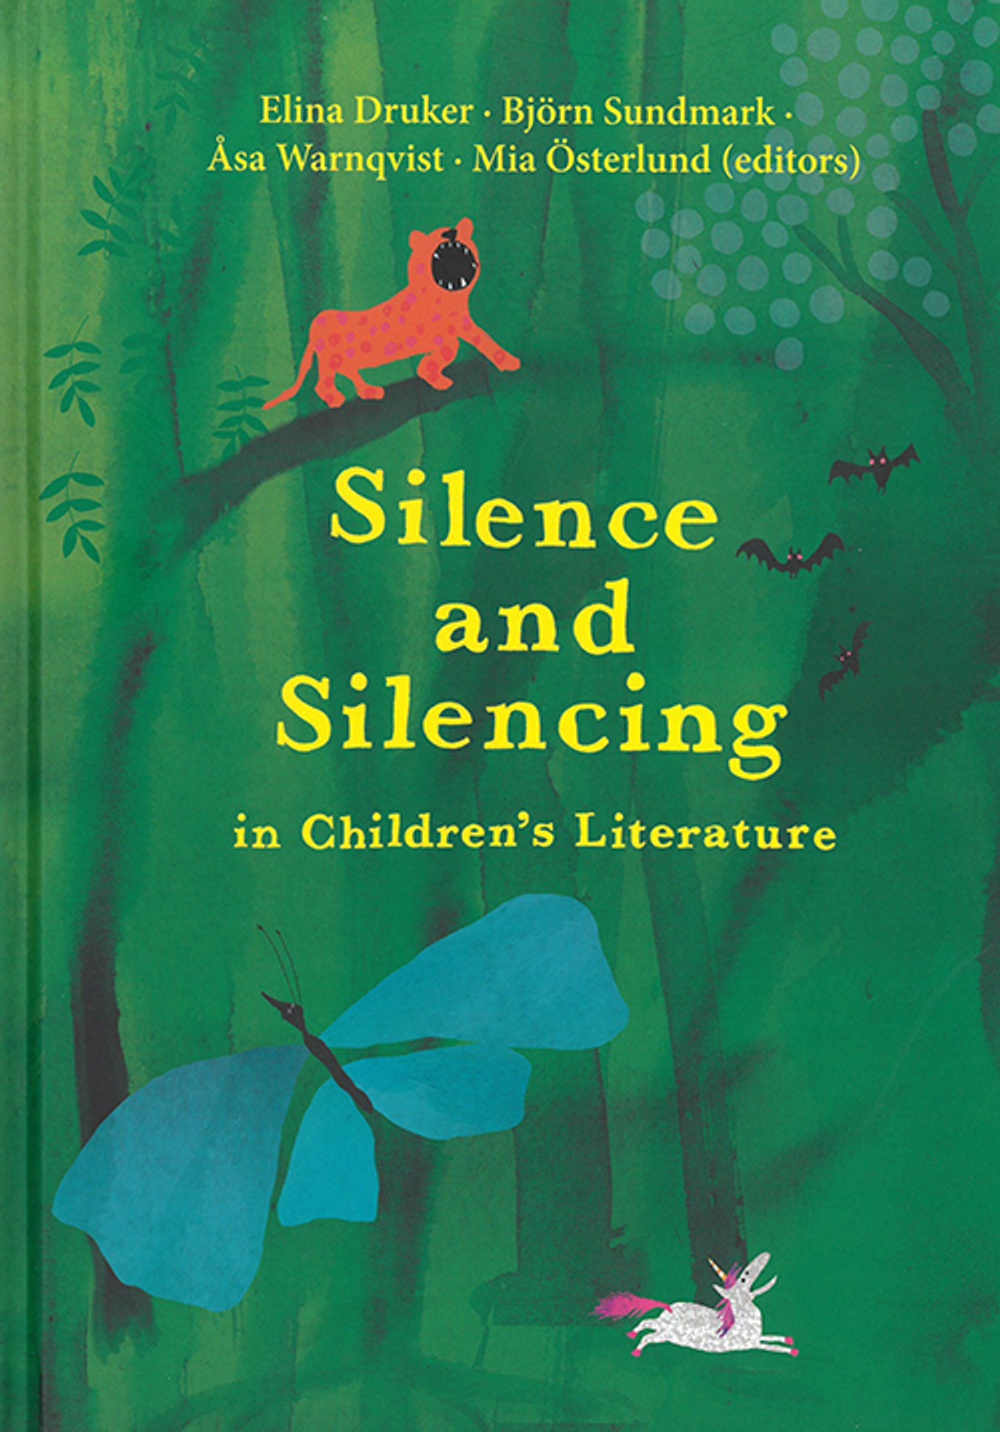 Omslag till Silence and Silencing in Children's Literature